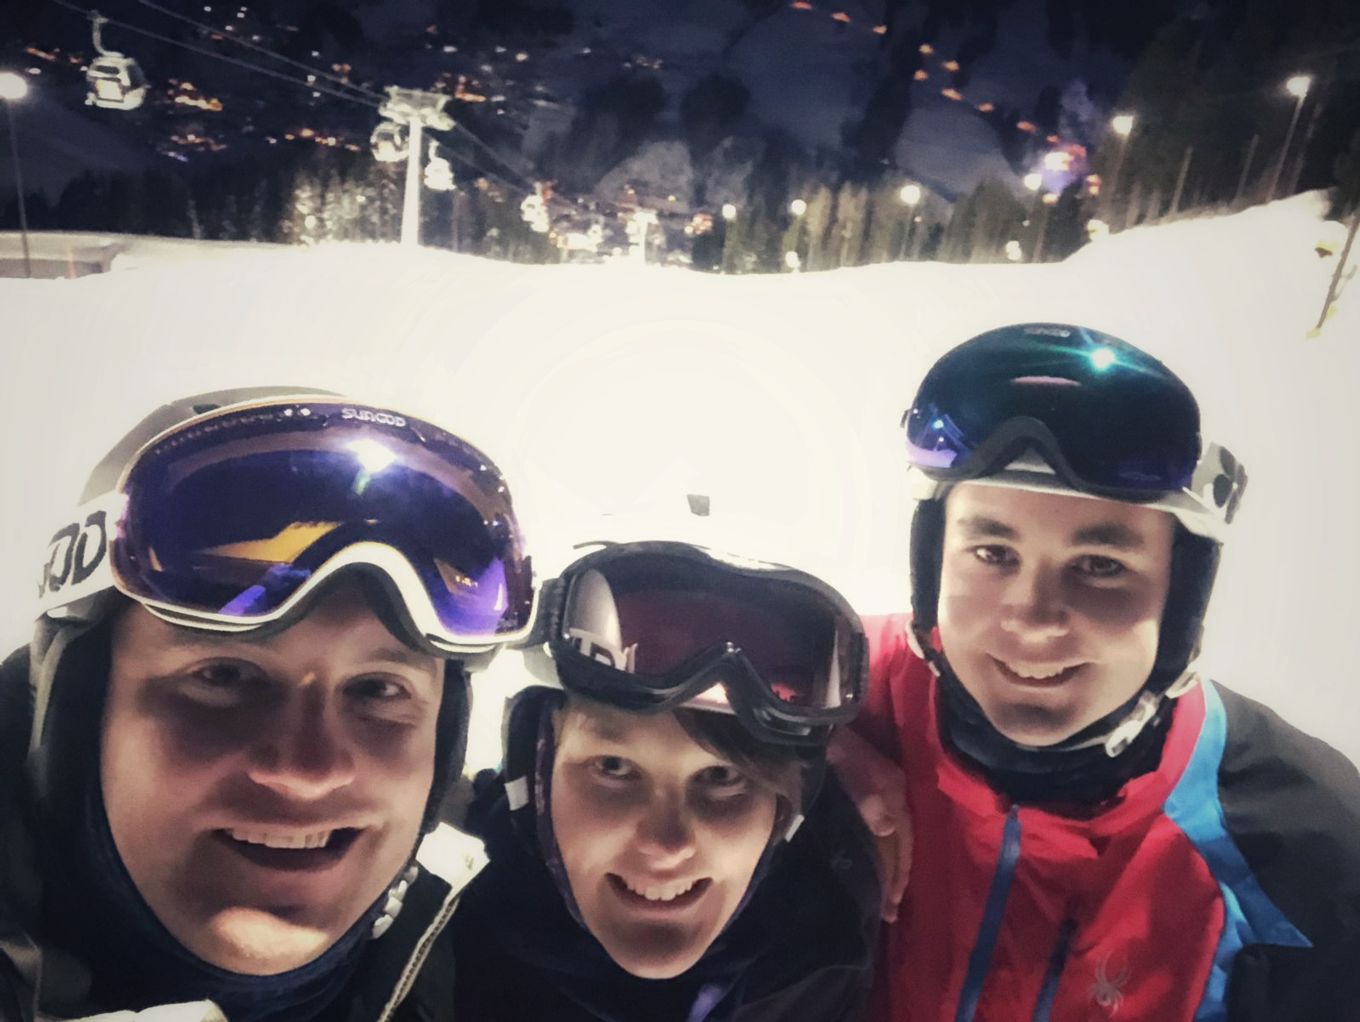 3 skiers smile for the camera.